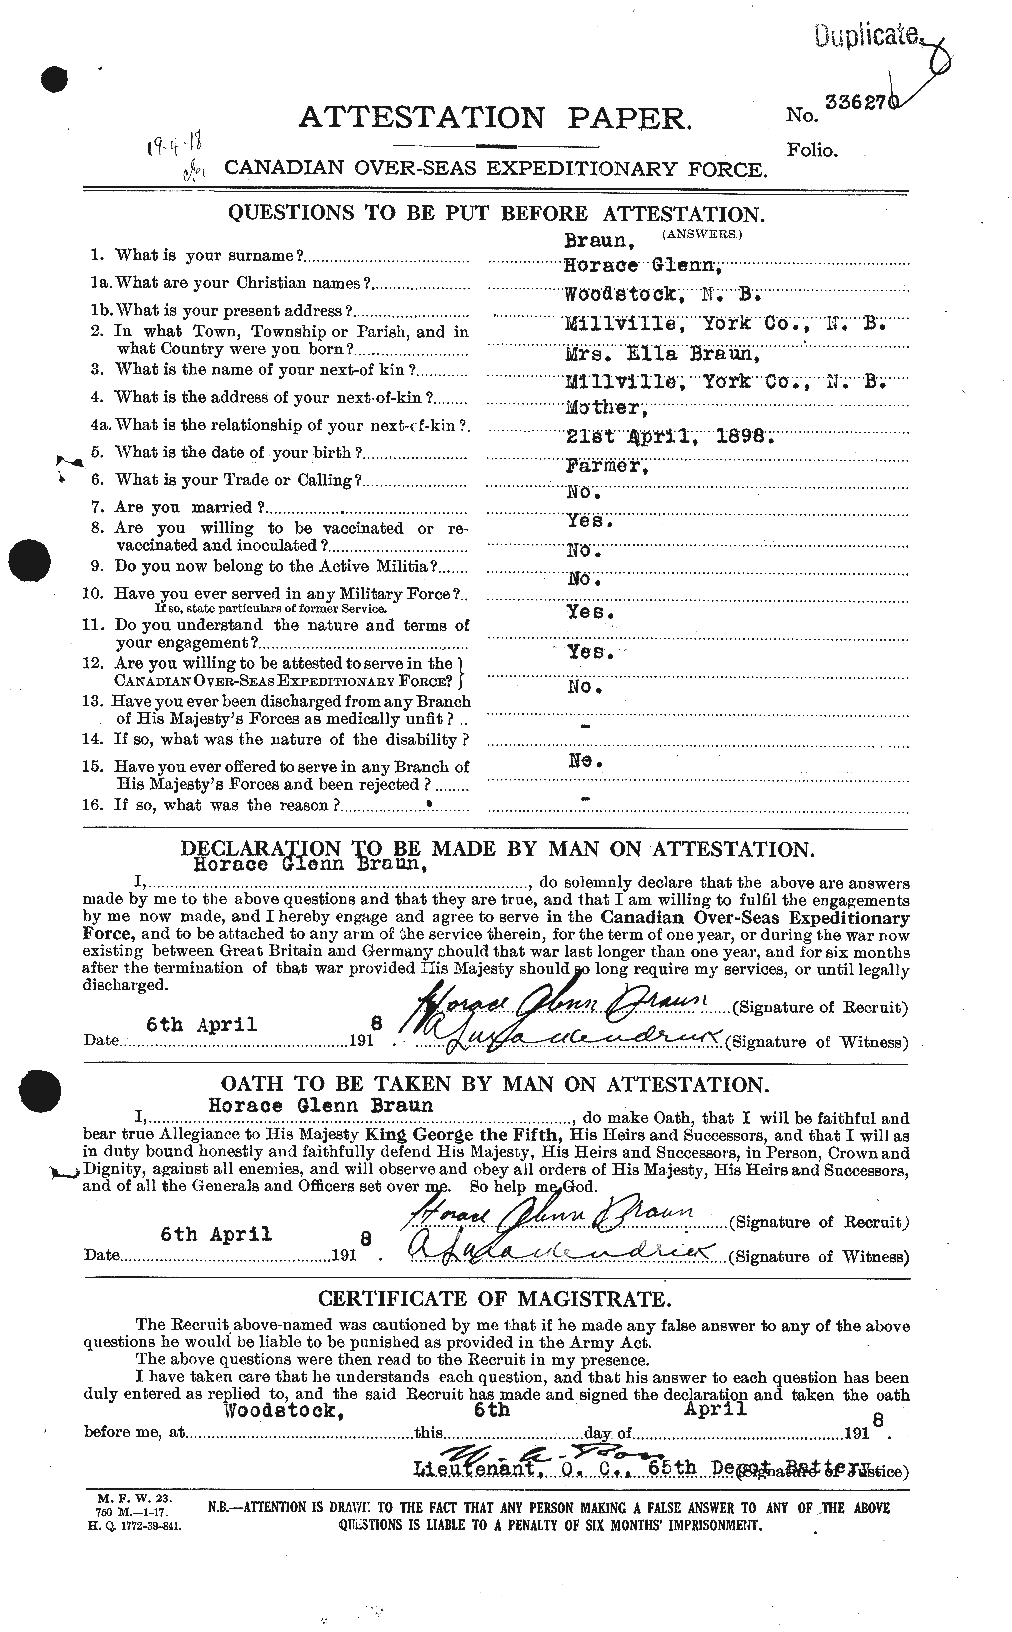 Personnel Records of the First World War - CEF 260624a